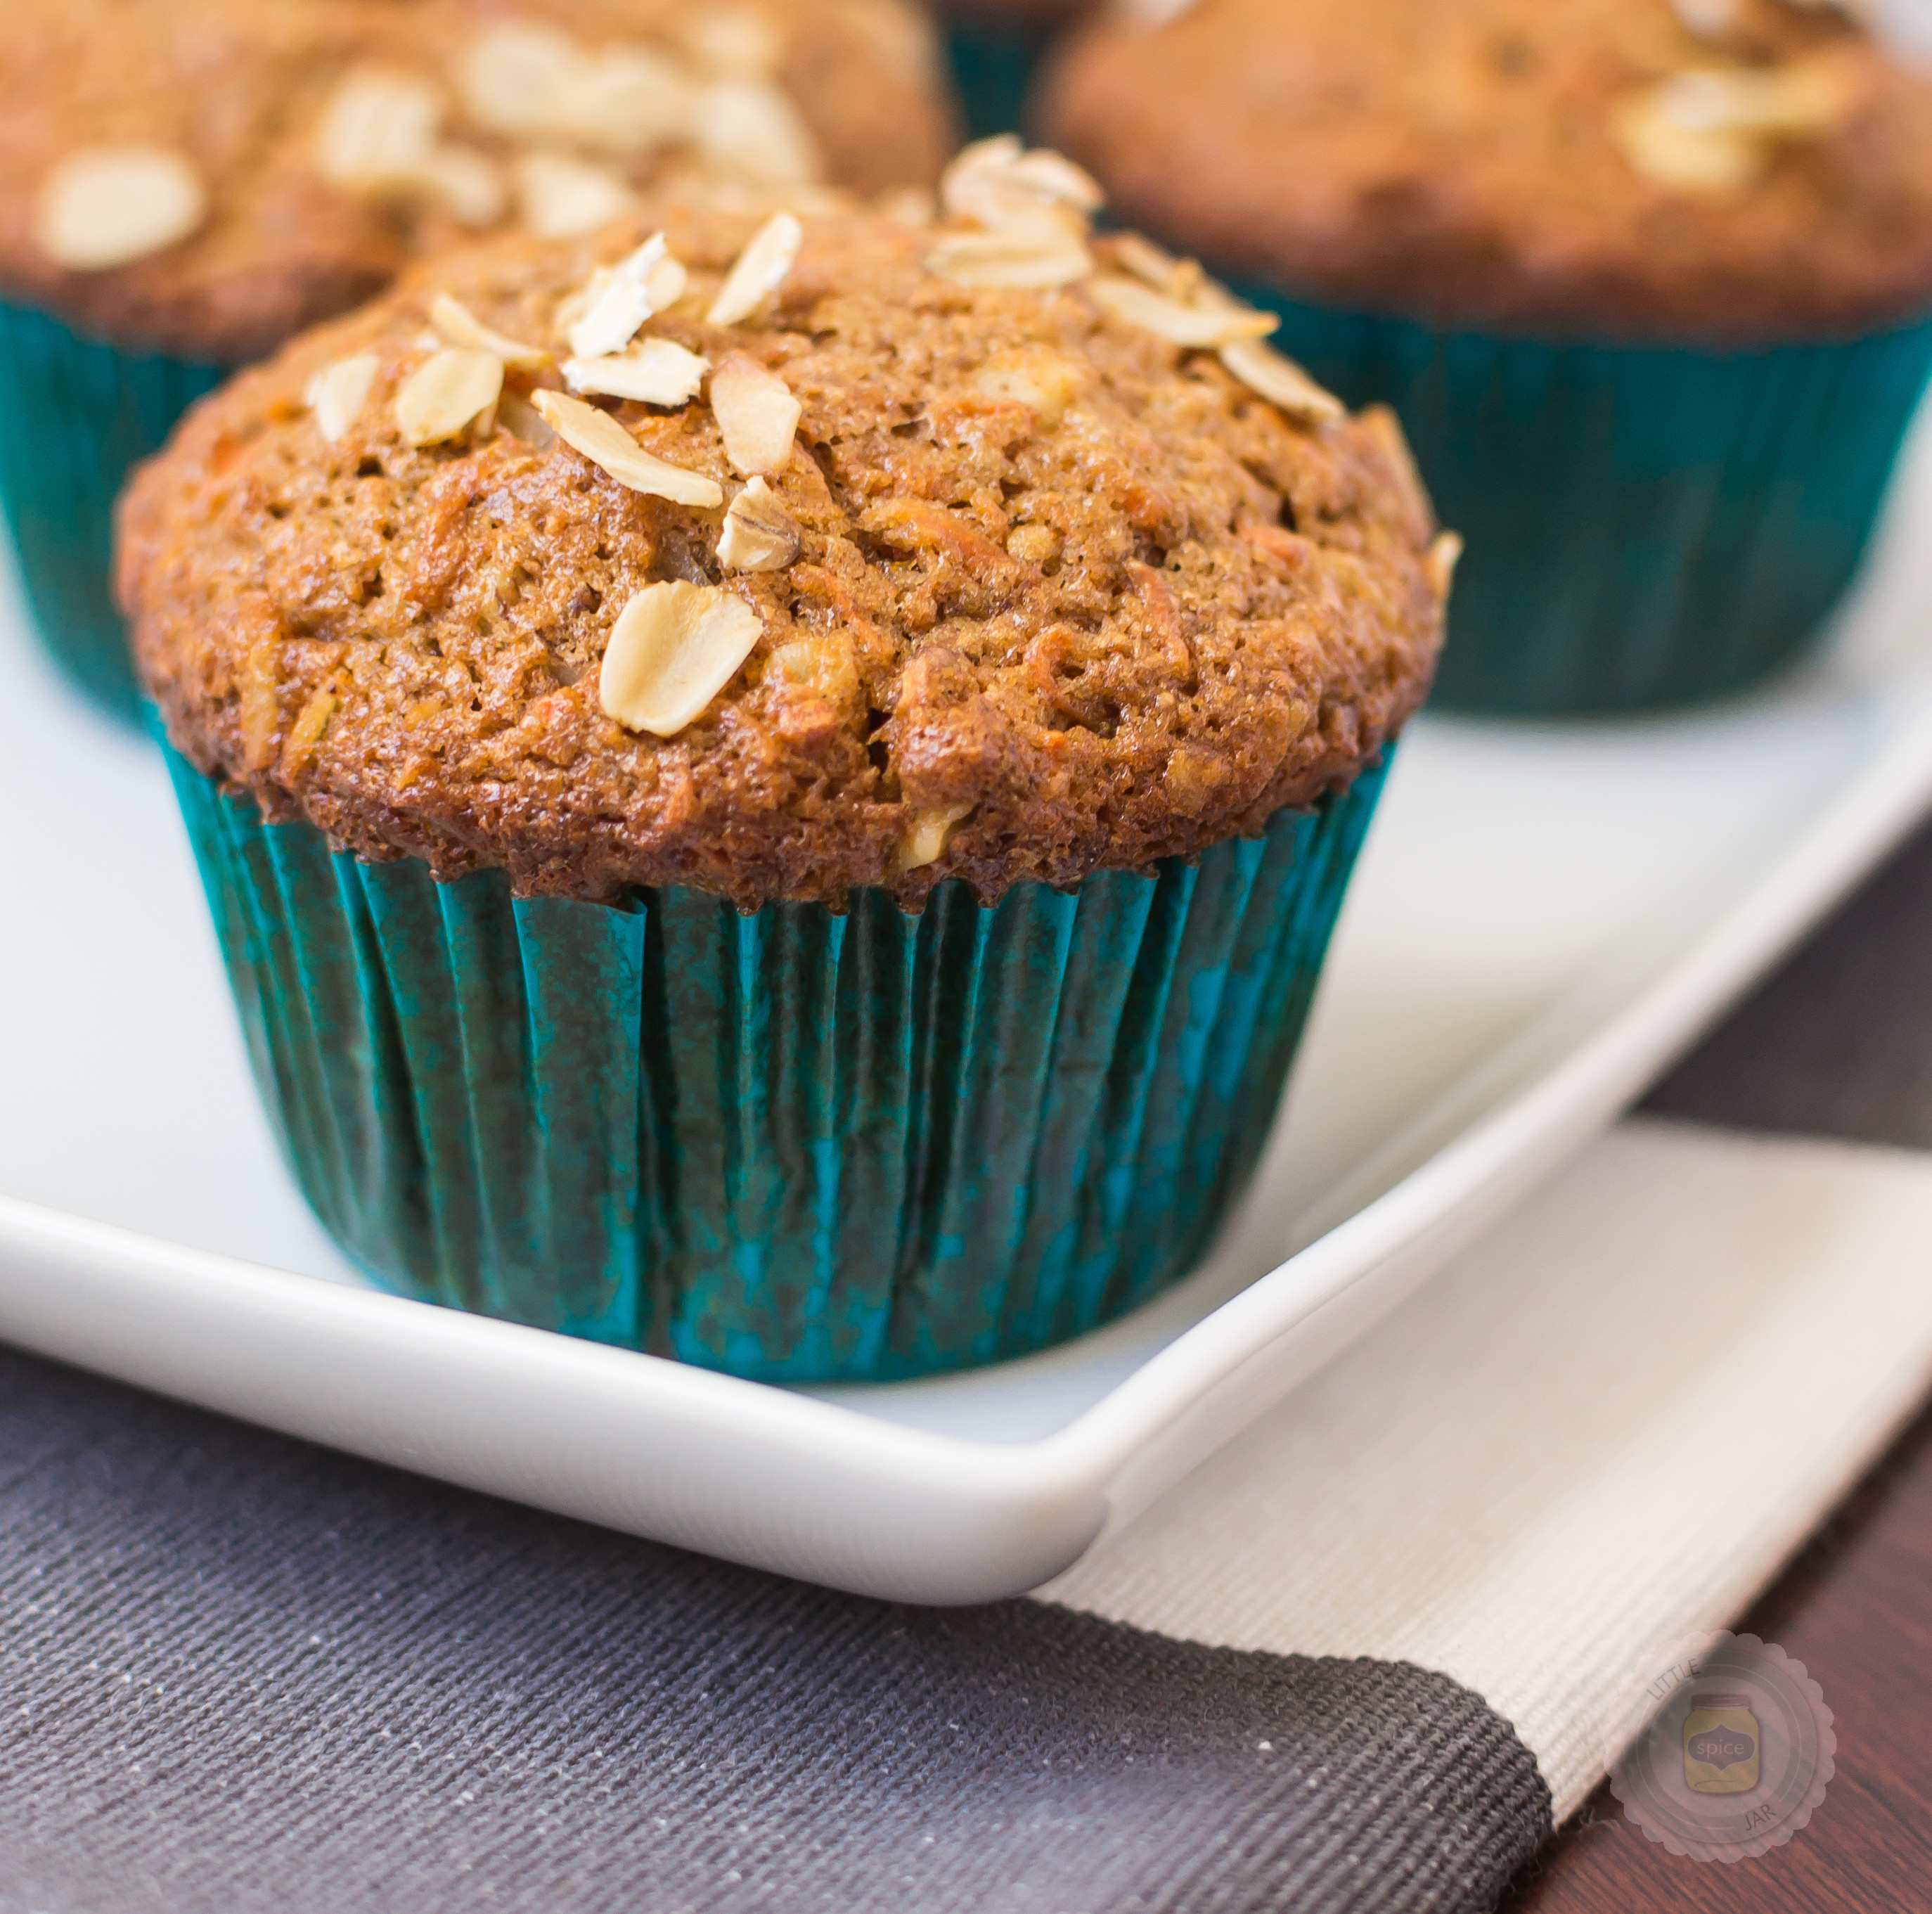 Healthy Carrot Muffins
 SUPER MOIST AND HEALTHY CARROT CAKE MUFFINS